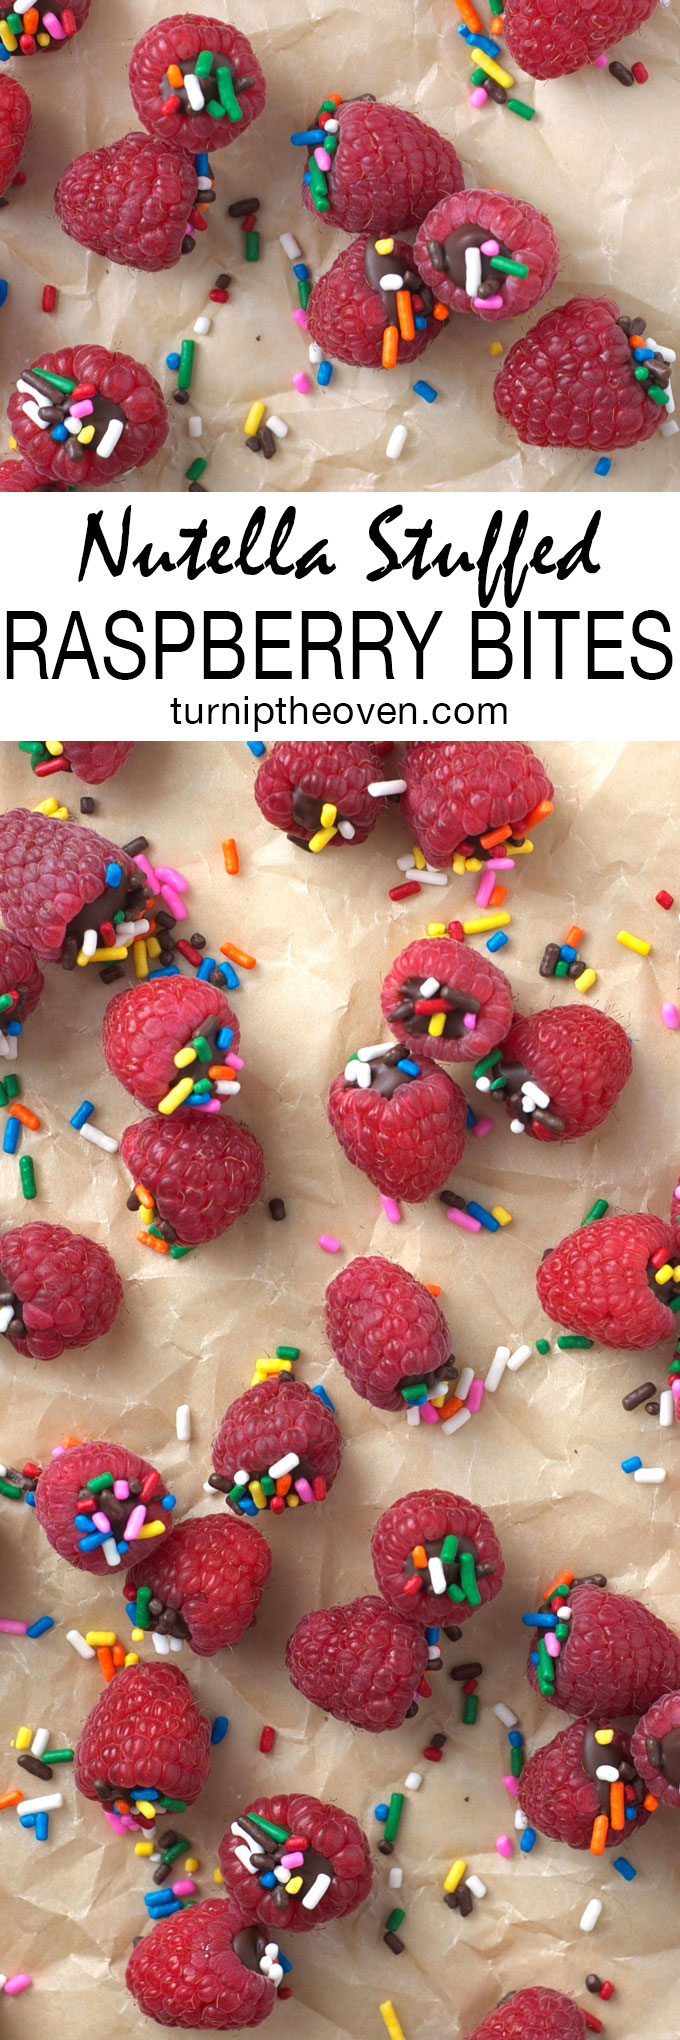 These easy, irresistible chocolate and Nutella stuffed raspberries are the perfect one-bite dessert. With only four simple ingredients (including rainbow sprinkles) they are a great cooking project for kids. Plus, with only 20 calories each, you can feel good about eating them too!